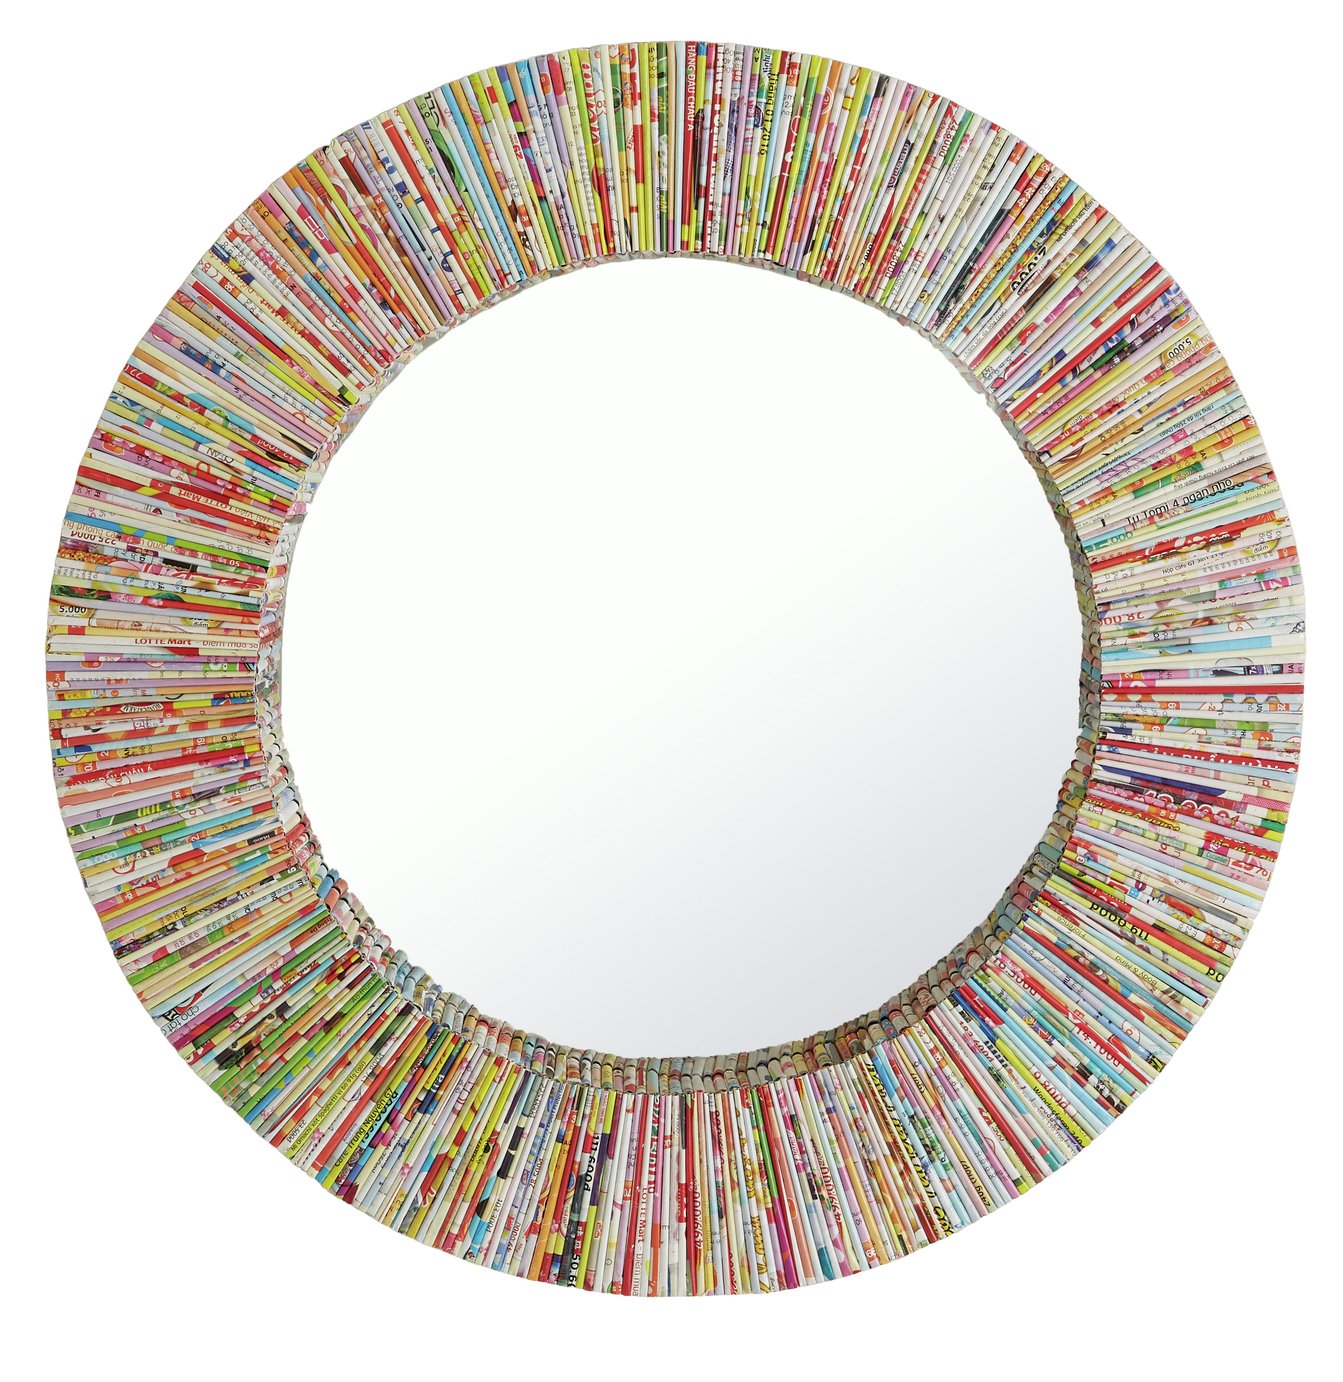 Habitat Cohen Recycled Magazine Round Wall Mirror Reviews - Updated ...